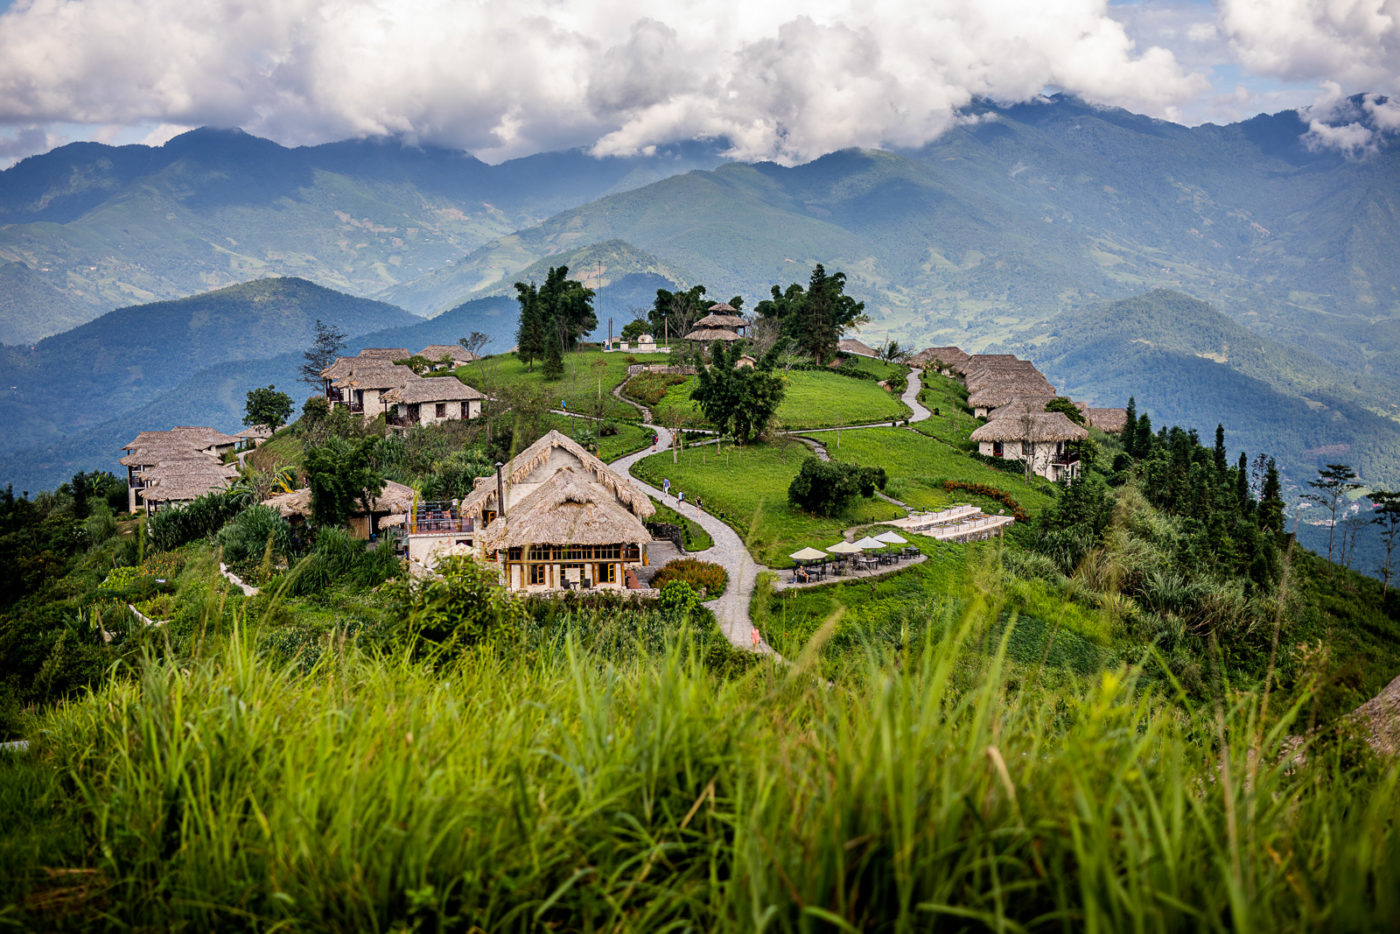 Rustic nature retreat in Sapa mountains and rice terraces